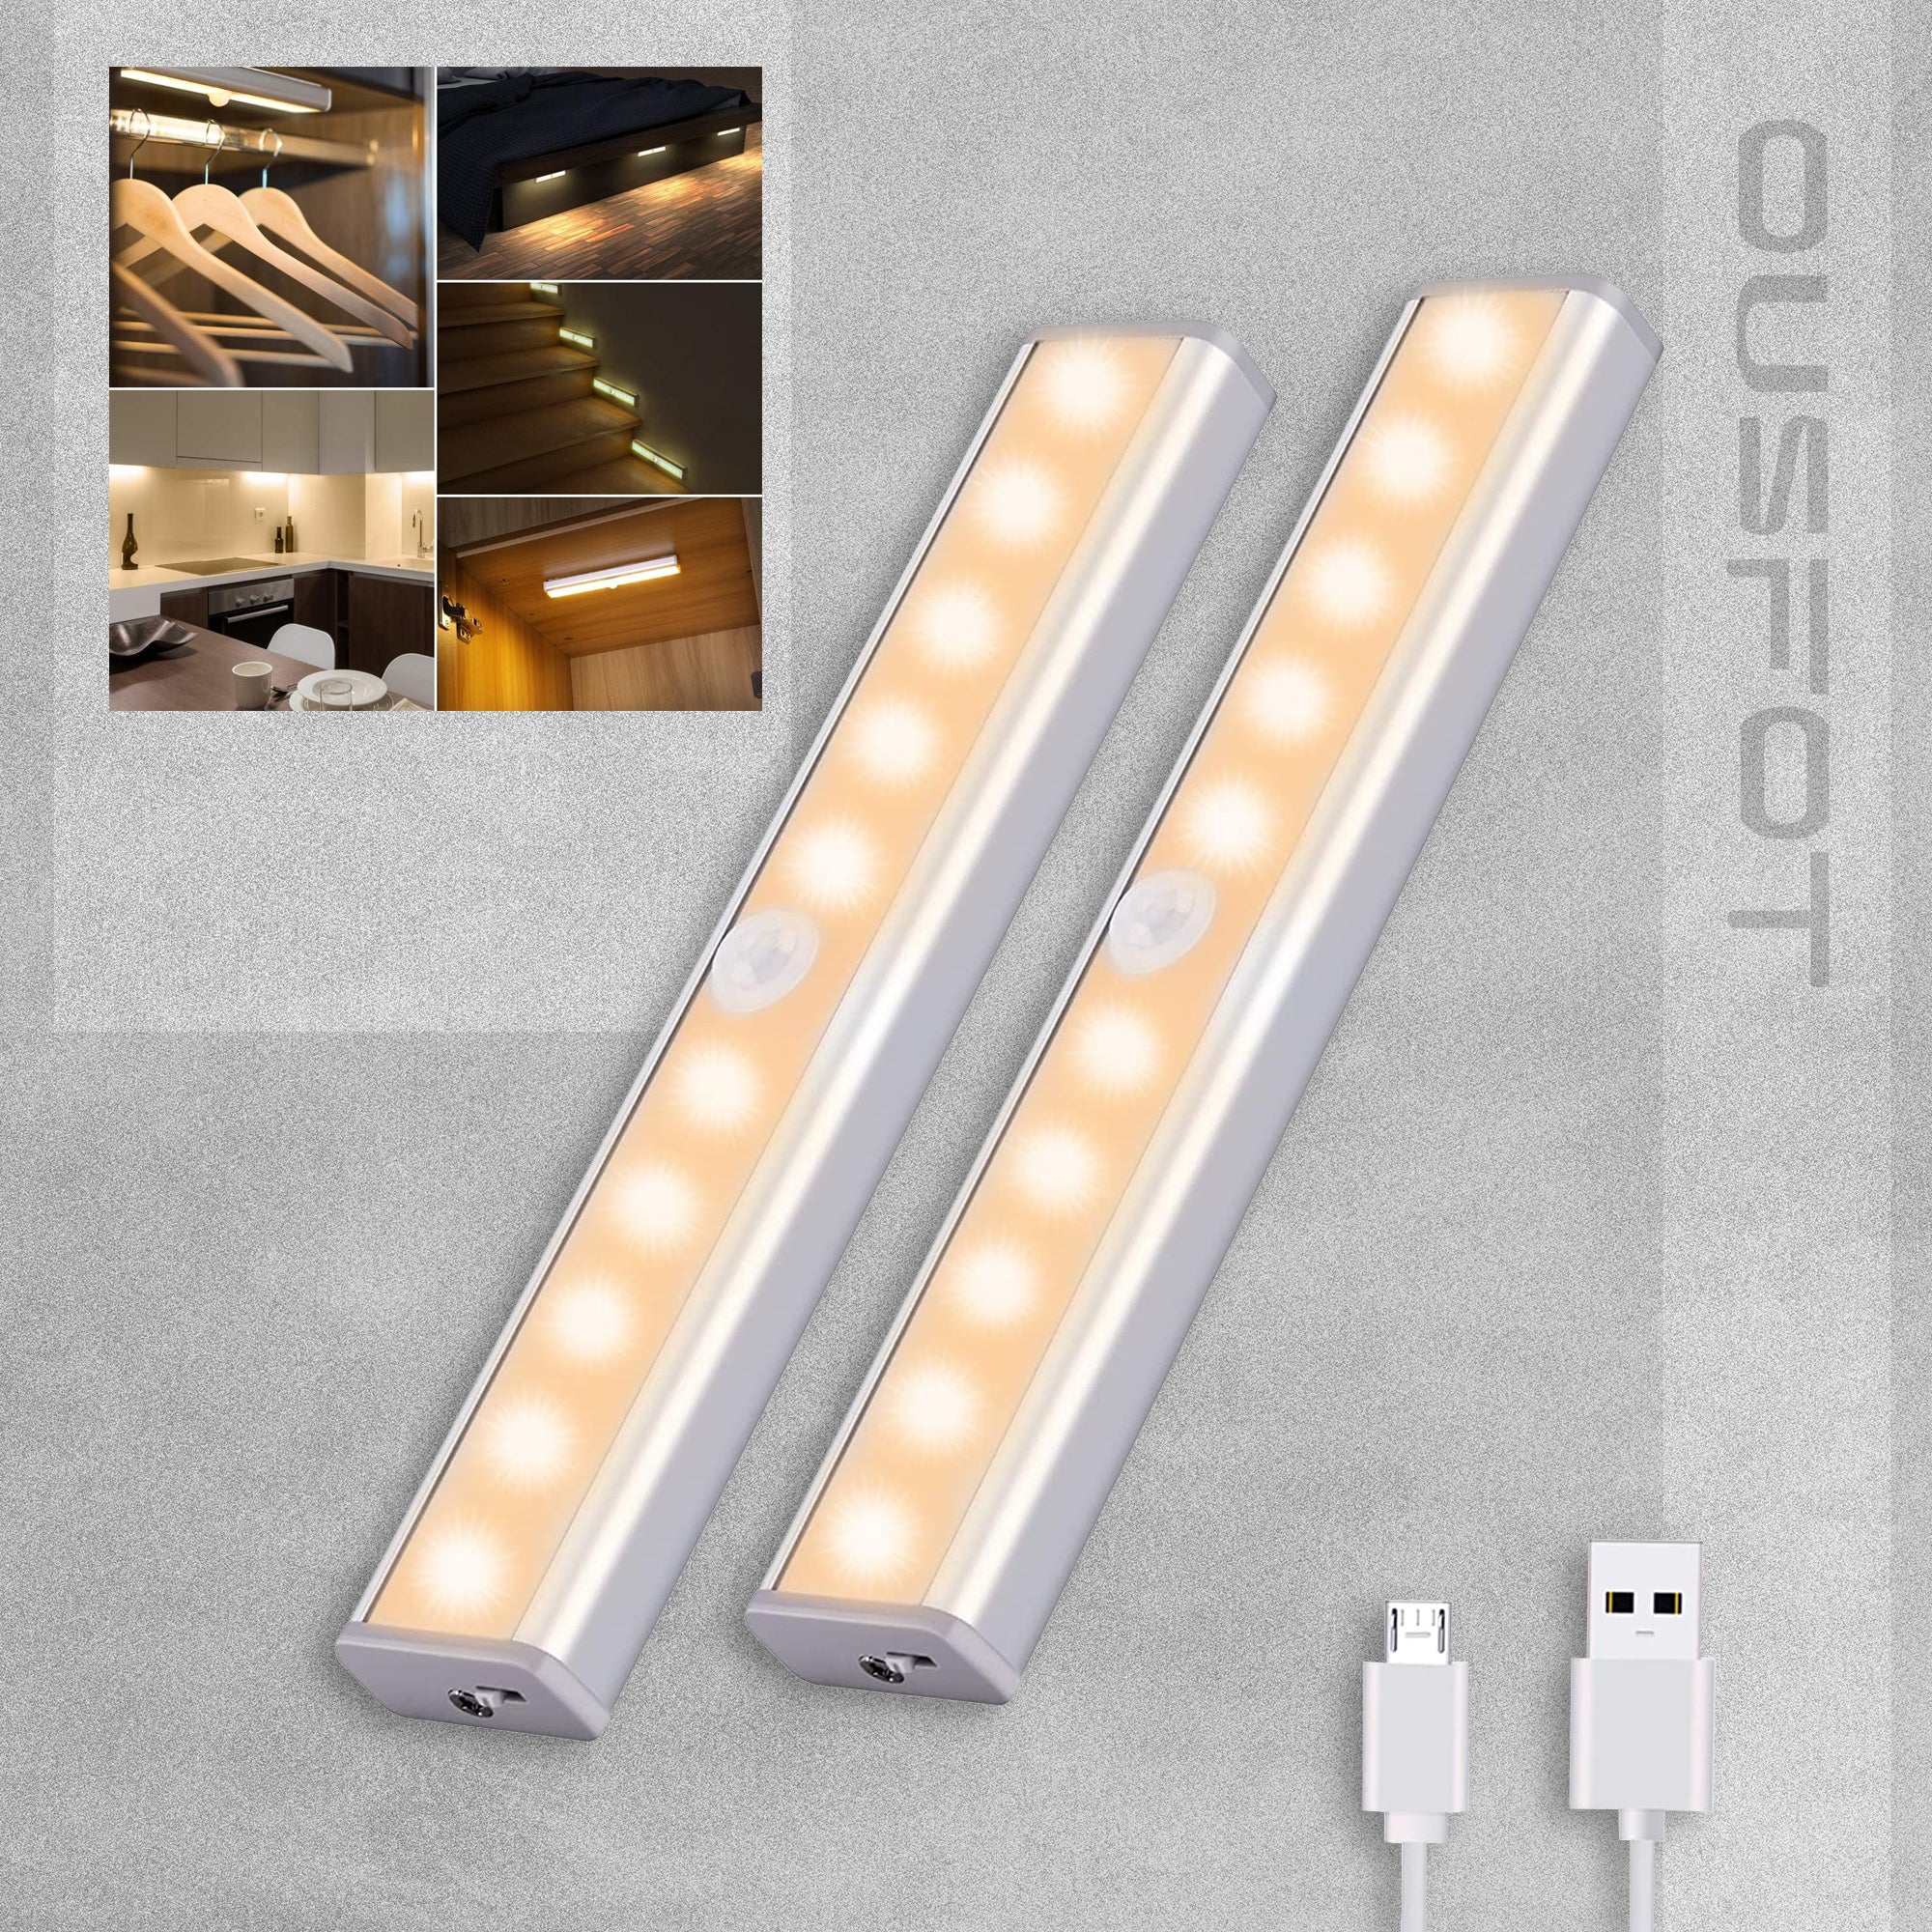 Motion Sensor 10 LED Rechargeable Night Light - Twin Pack